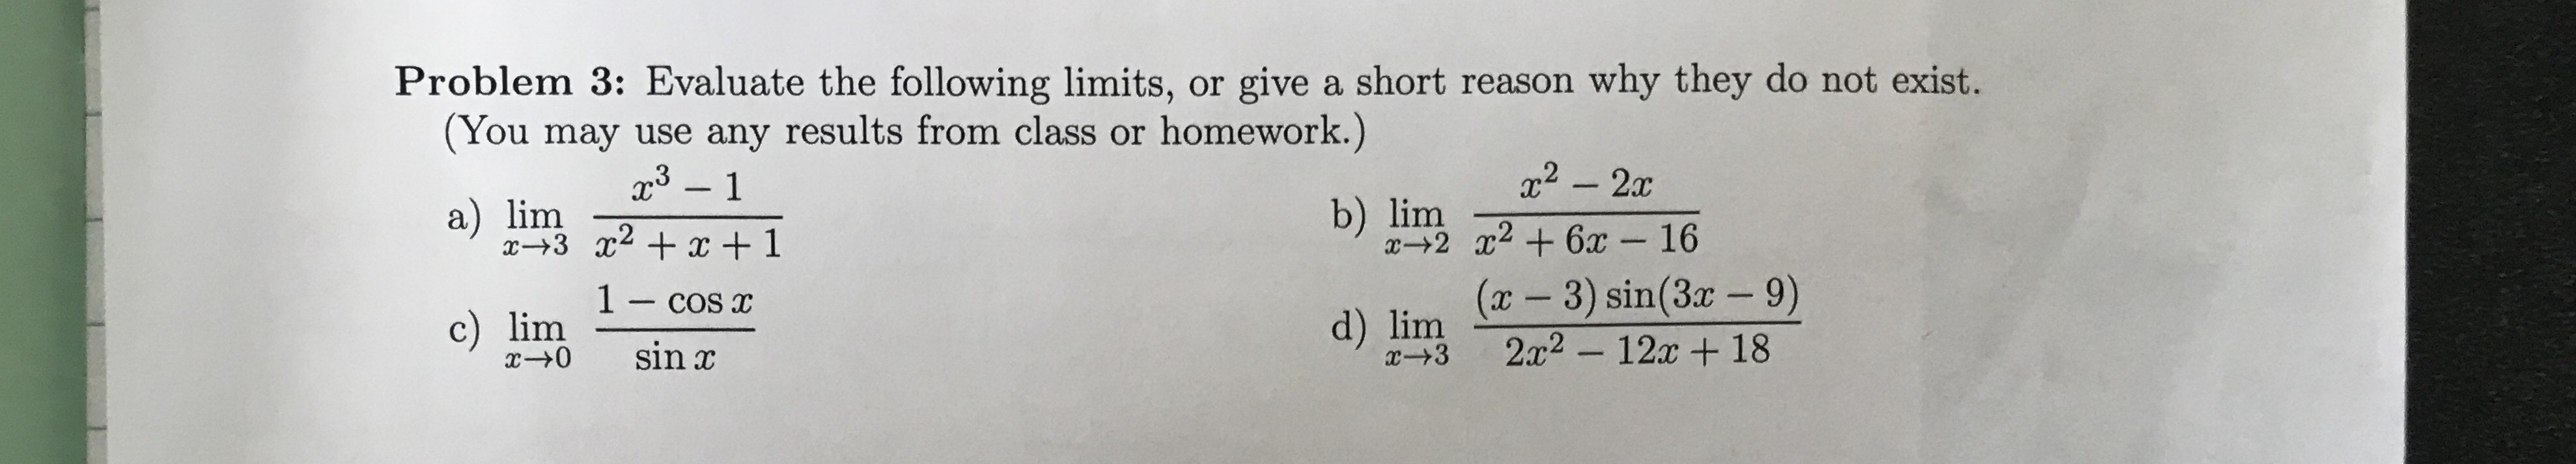 Problem 3: Evaluate the following limits, or give a short reason why they do not exist.
(You may use any results from class or homework.)
x3 1
x2-2x
b) lim
x2 6x
a) lim
16
(x-3) sin(3x - 9)
2x2-12 18
1- cos x
d) lim
x-+3
c) lim
+0
sin x
